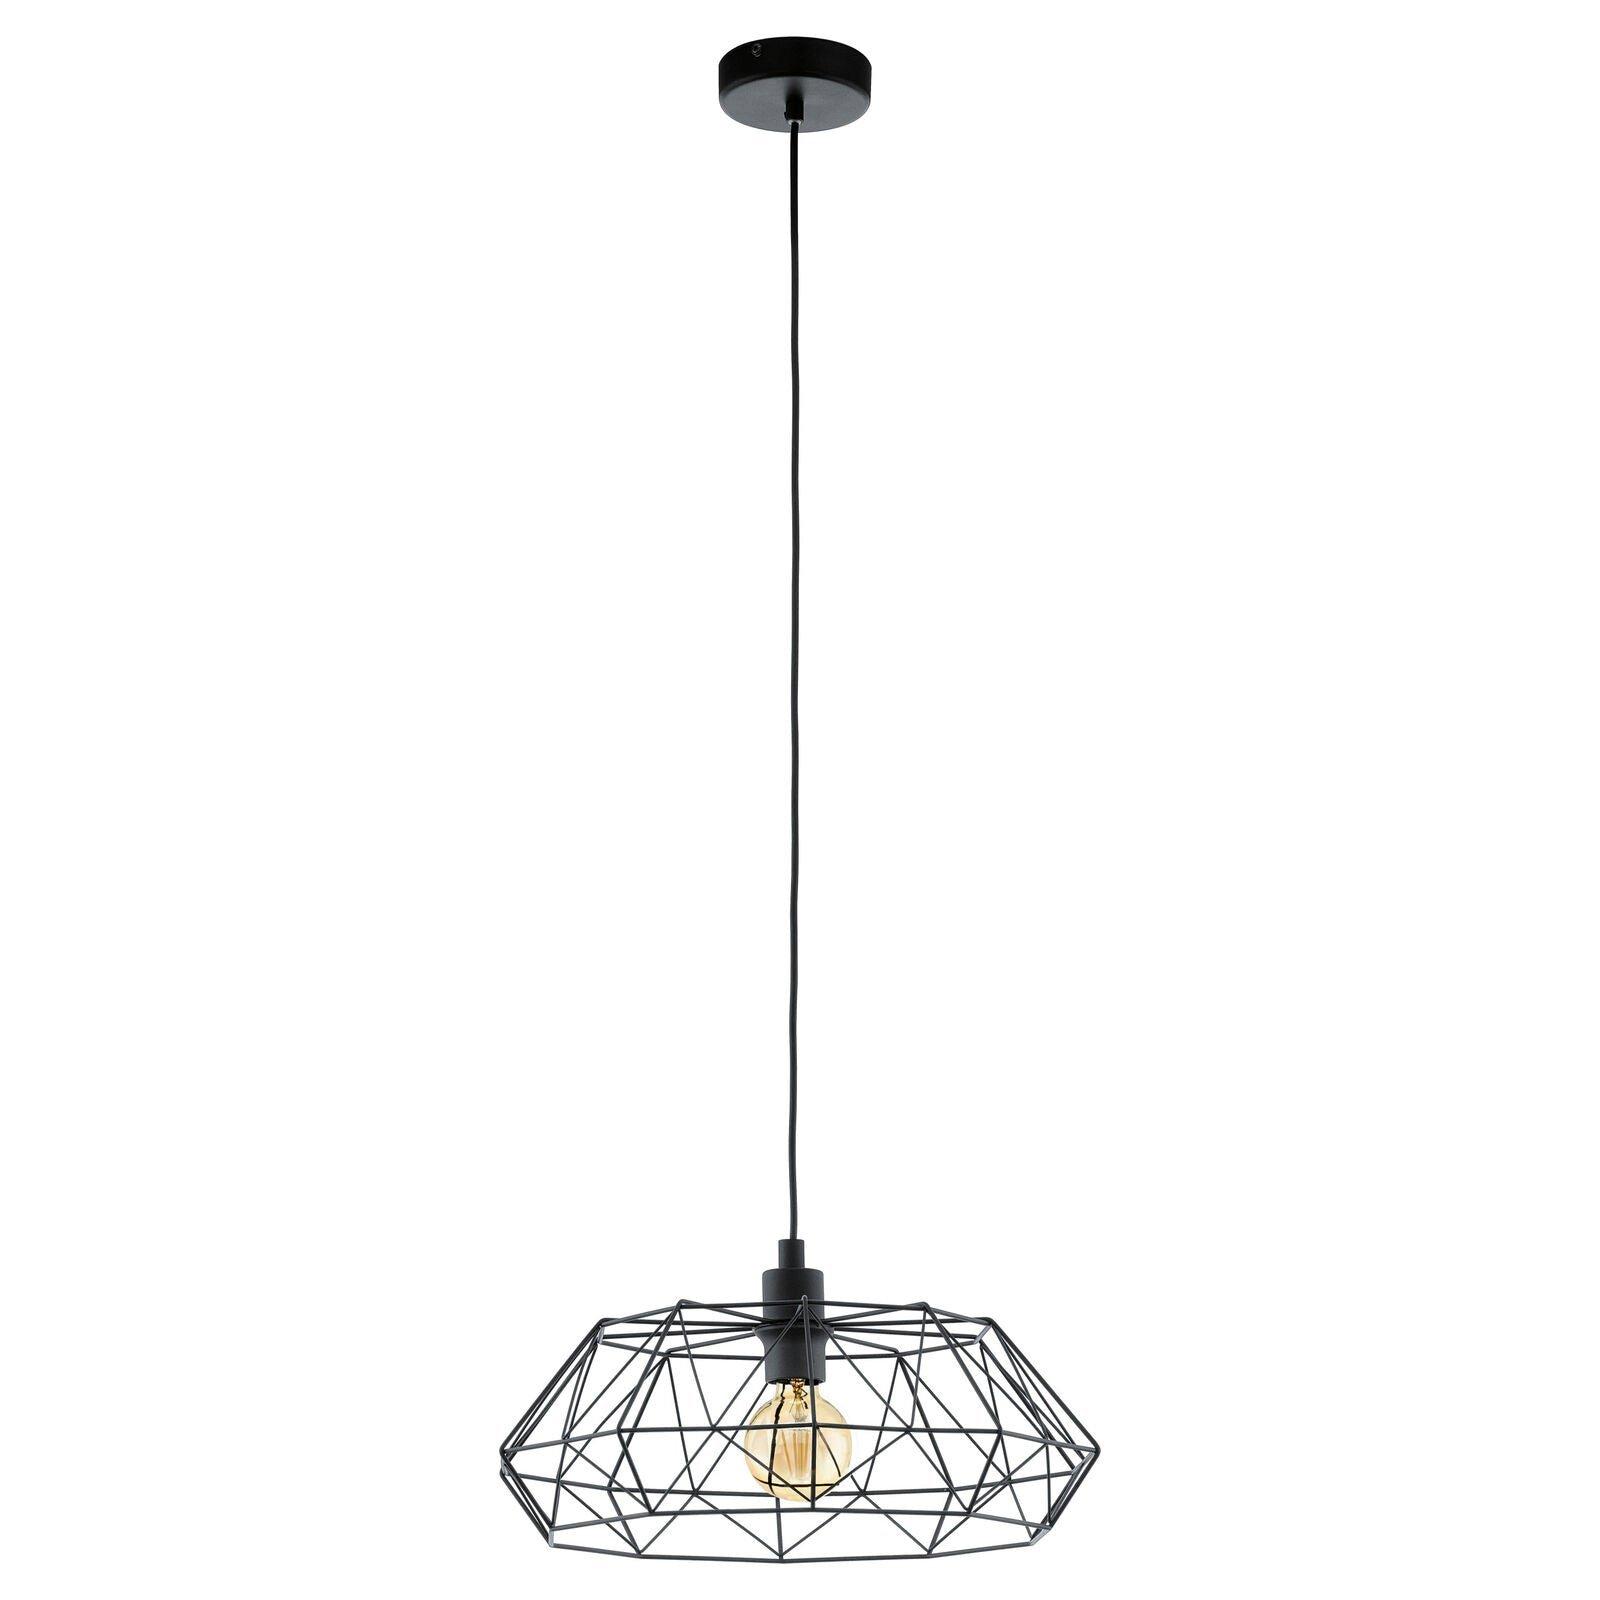 Hanging Ceiling Pendant Light Black Cage Shade 1x 60W E27 Hallway Feature Lamp